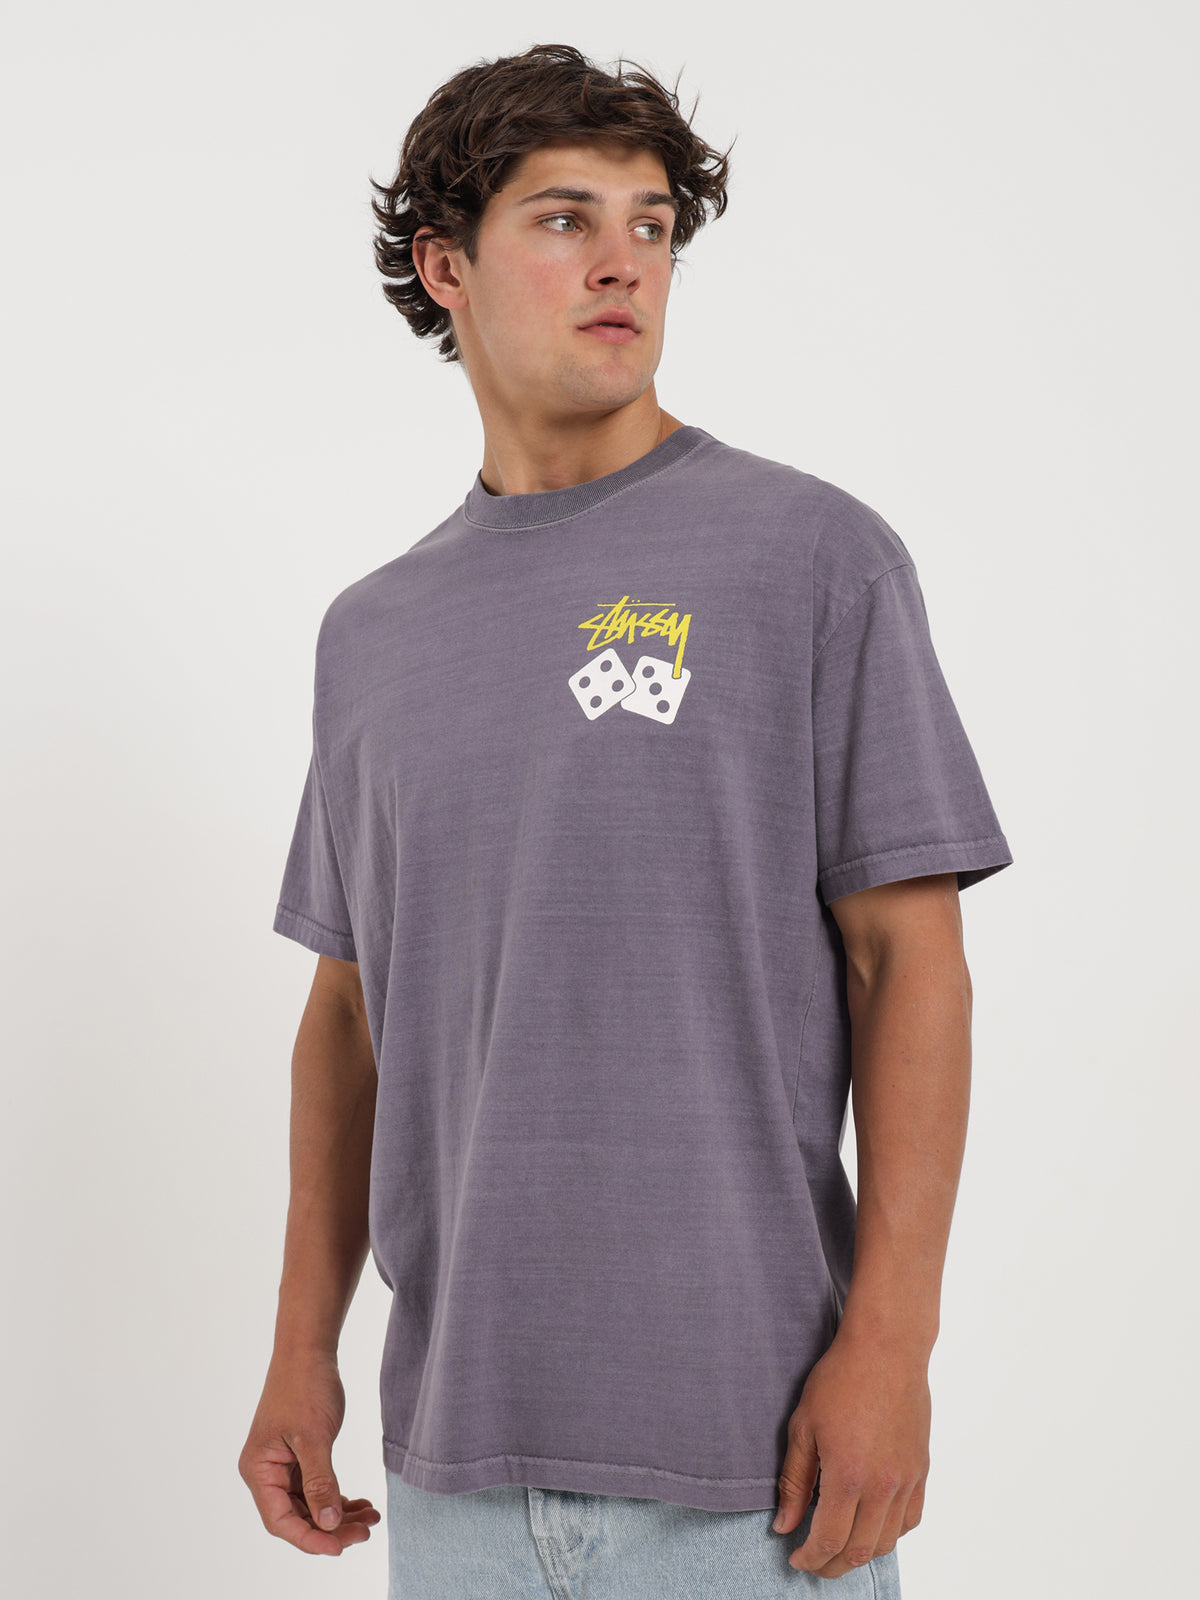 Colour Dice Heavyweight T-Shirt in Pigment Purple